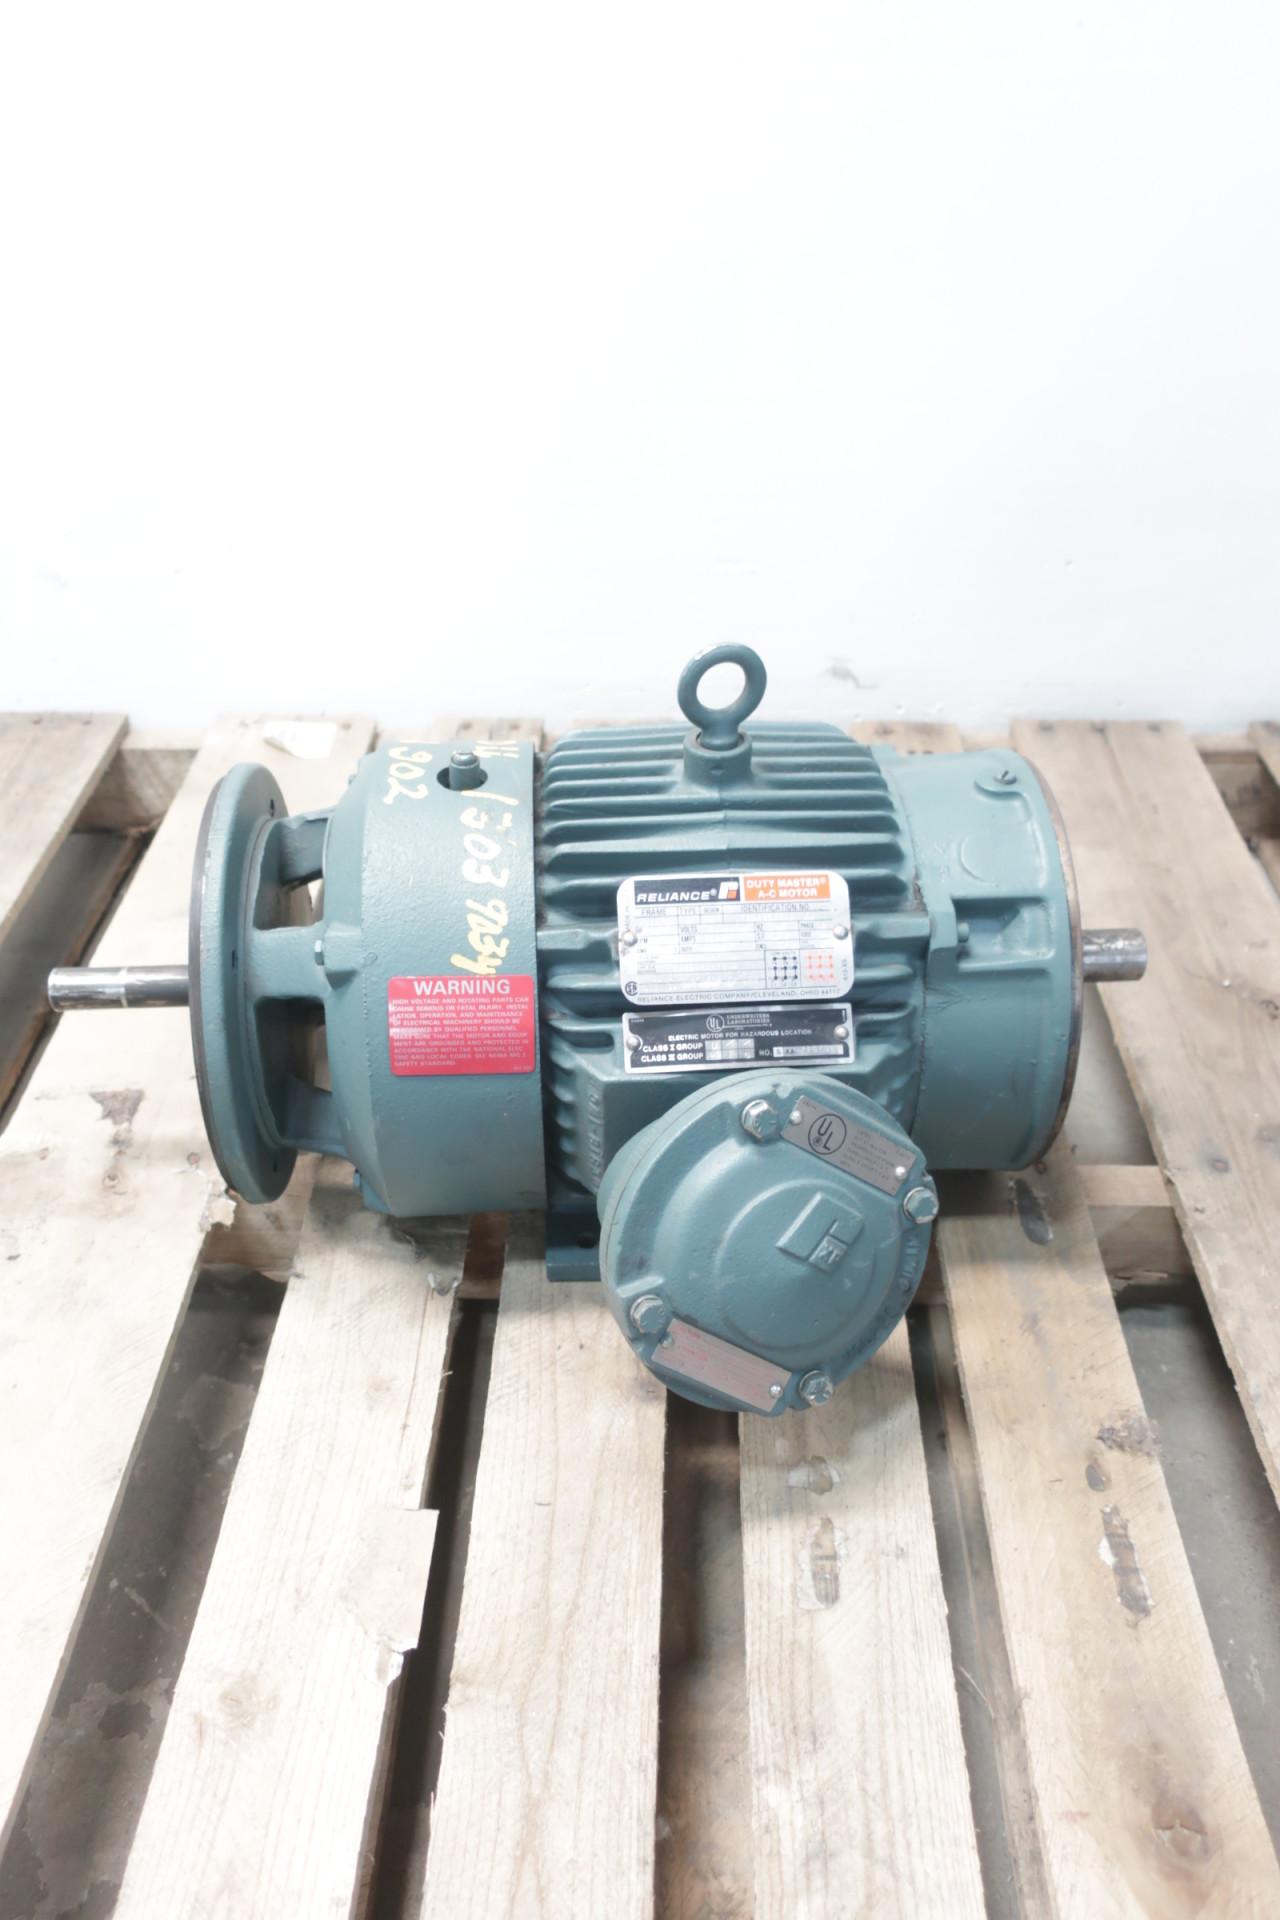 Details about   Reliance electric P14H1448S 3phase electric motor 